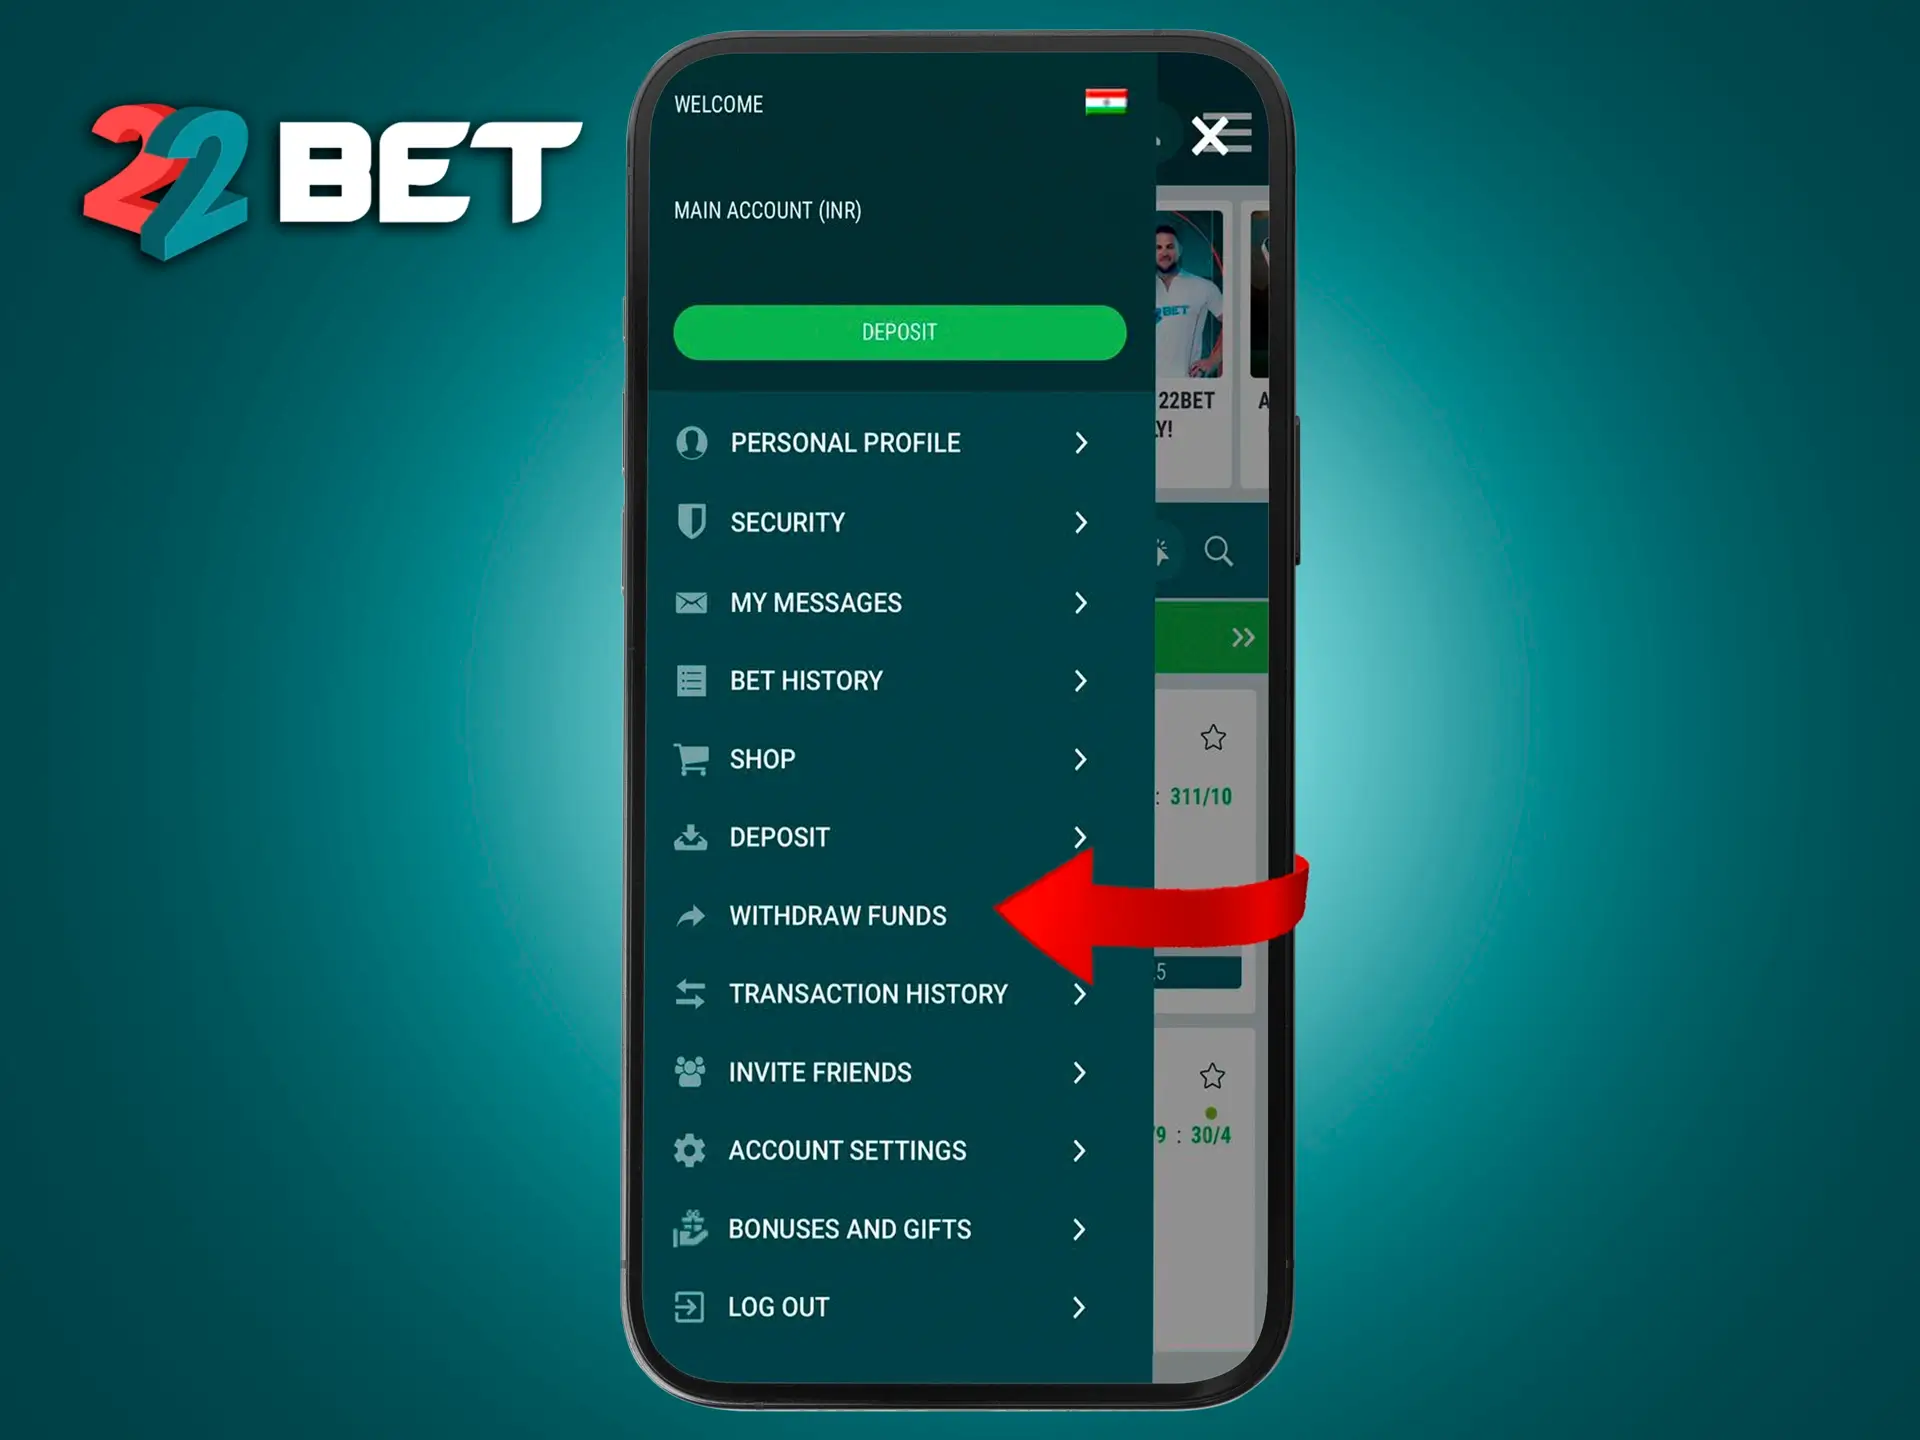 Open the menu and click on withdrawals at 22Bet Casino.